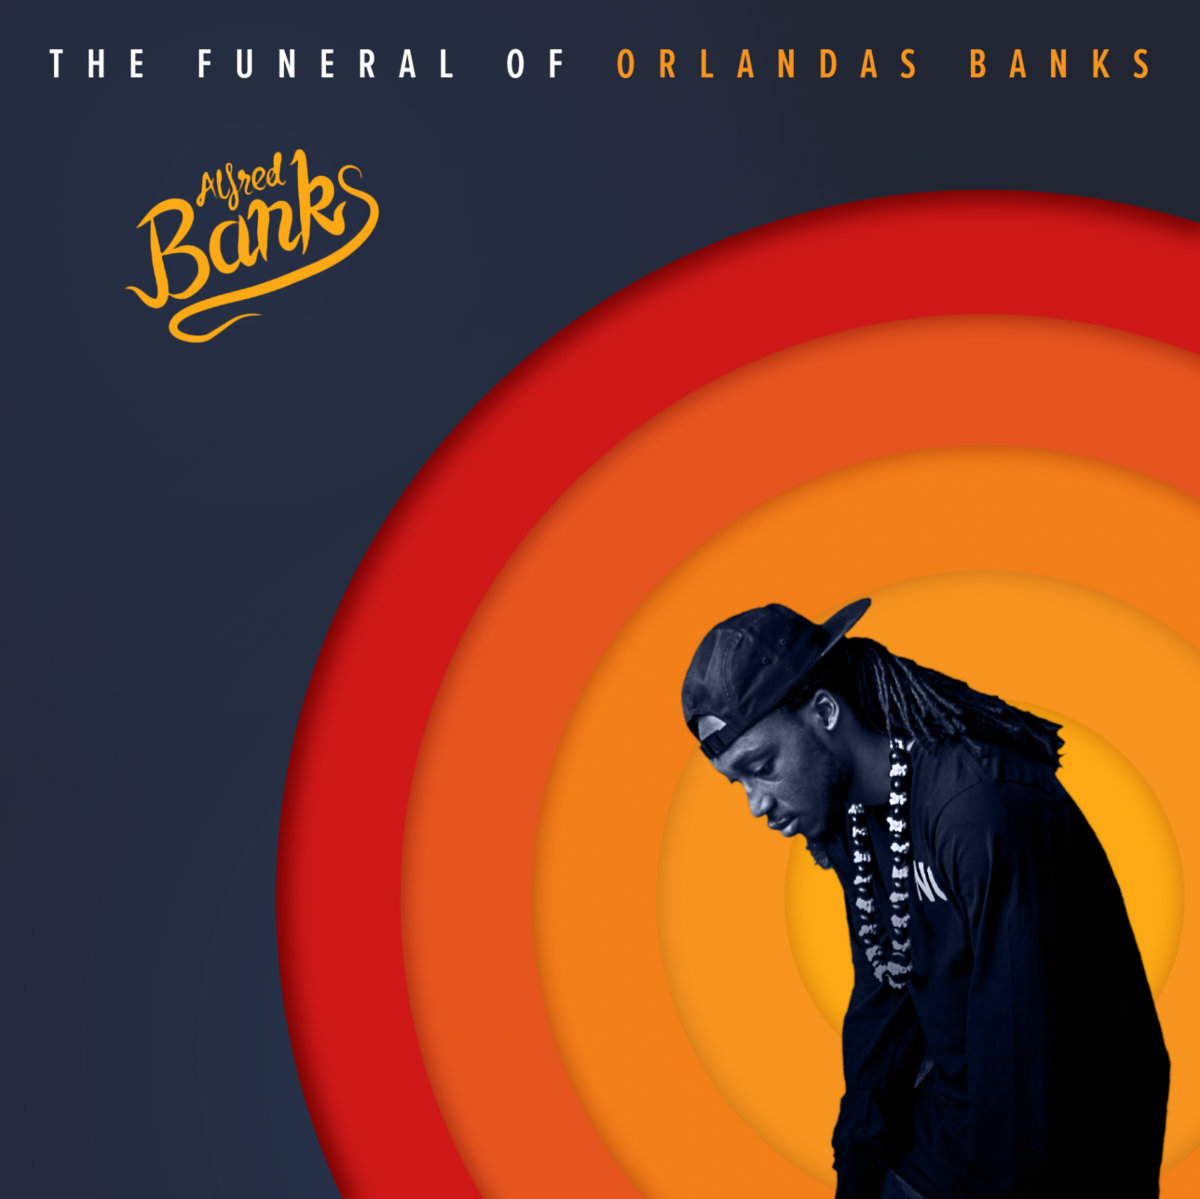 Alfred Banks Struggles With His Brother Death On “The Funeral of Orlandas Banks”